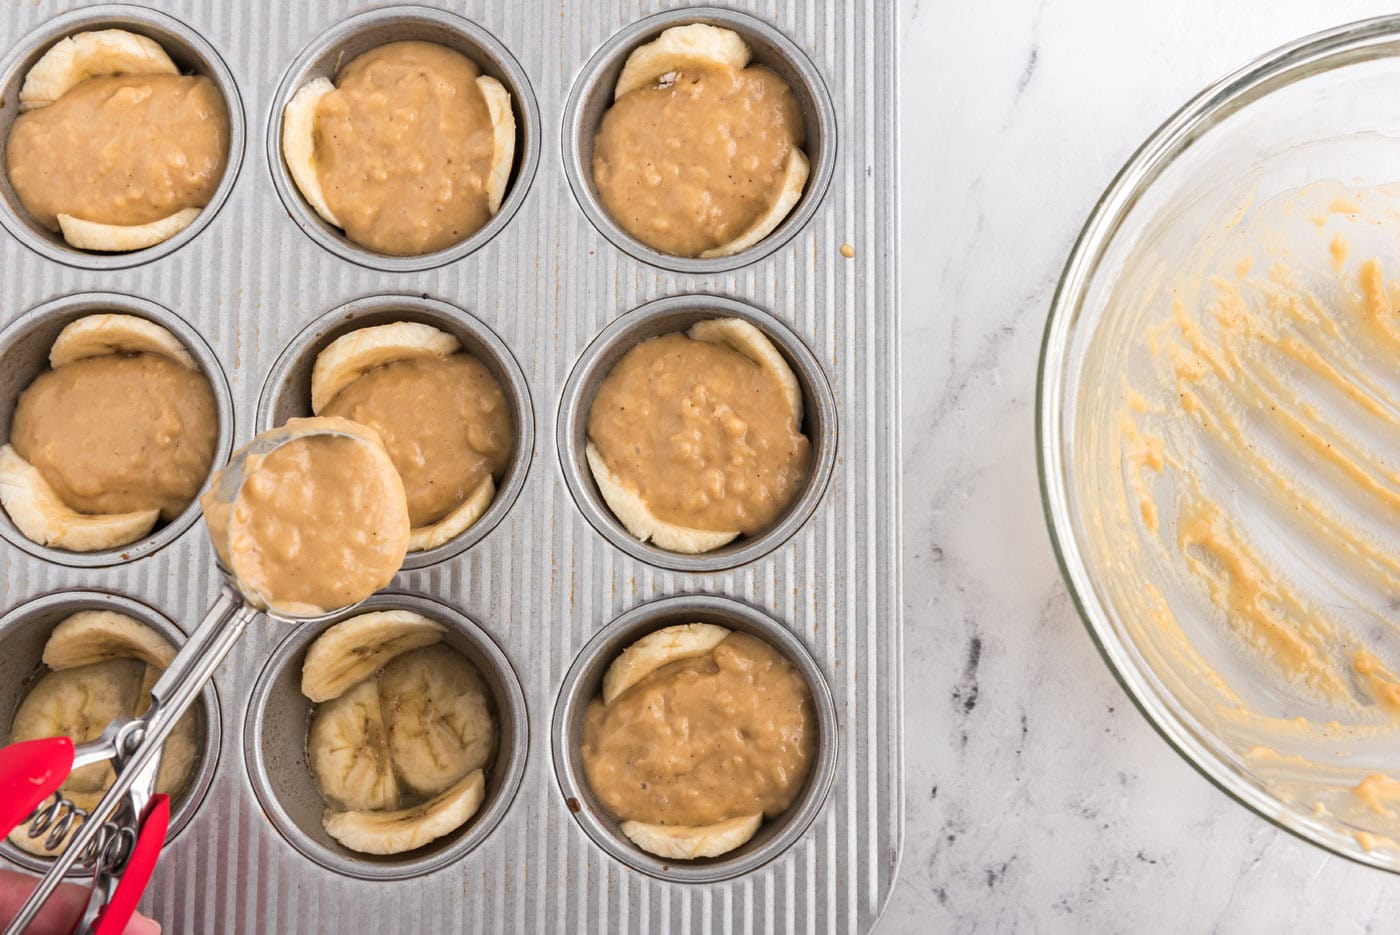 adding muffin ingredients to banana lined muffin pan